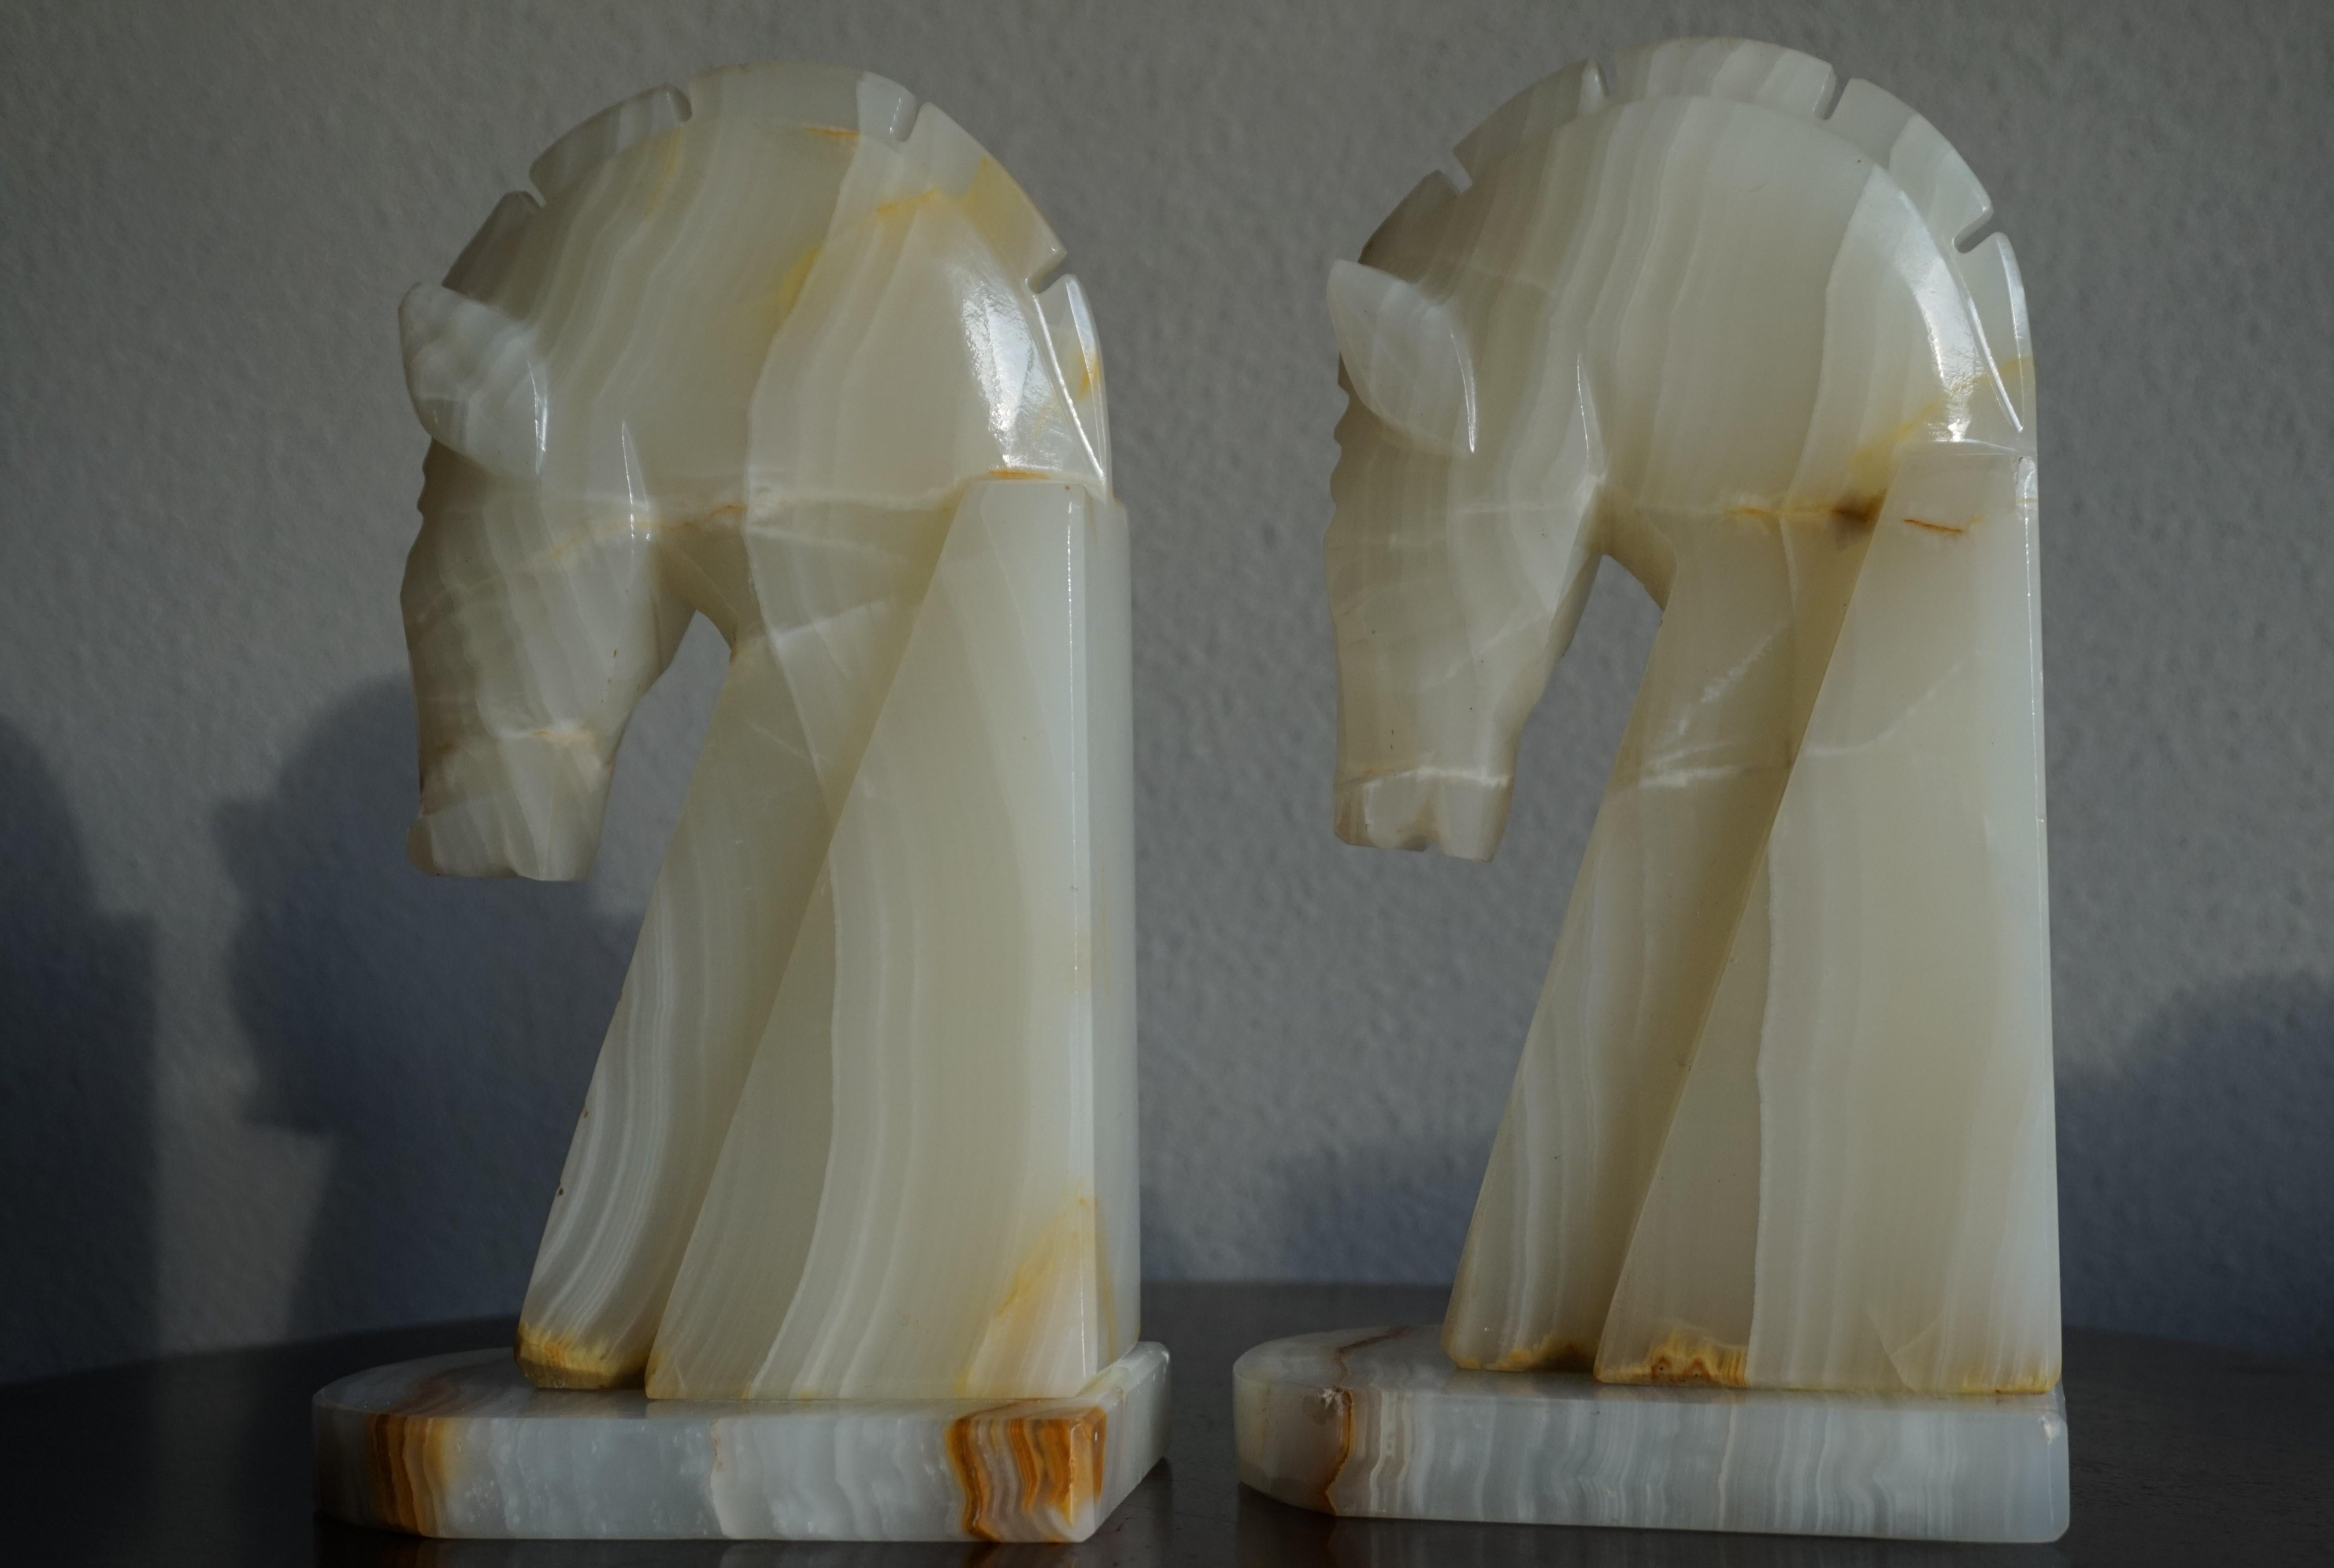 European Midcentury Era Pair of Handcrafted Art Deco Style Horse Sculpture Onyx Bookends